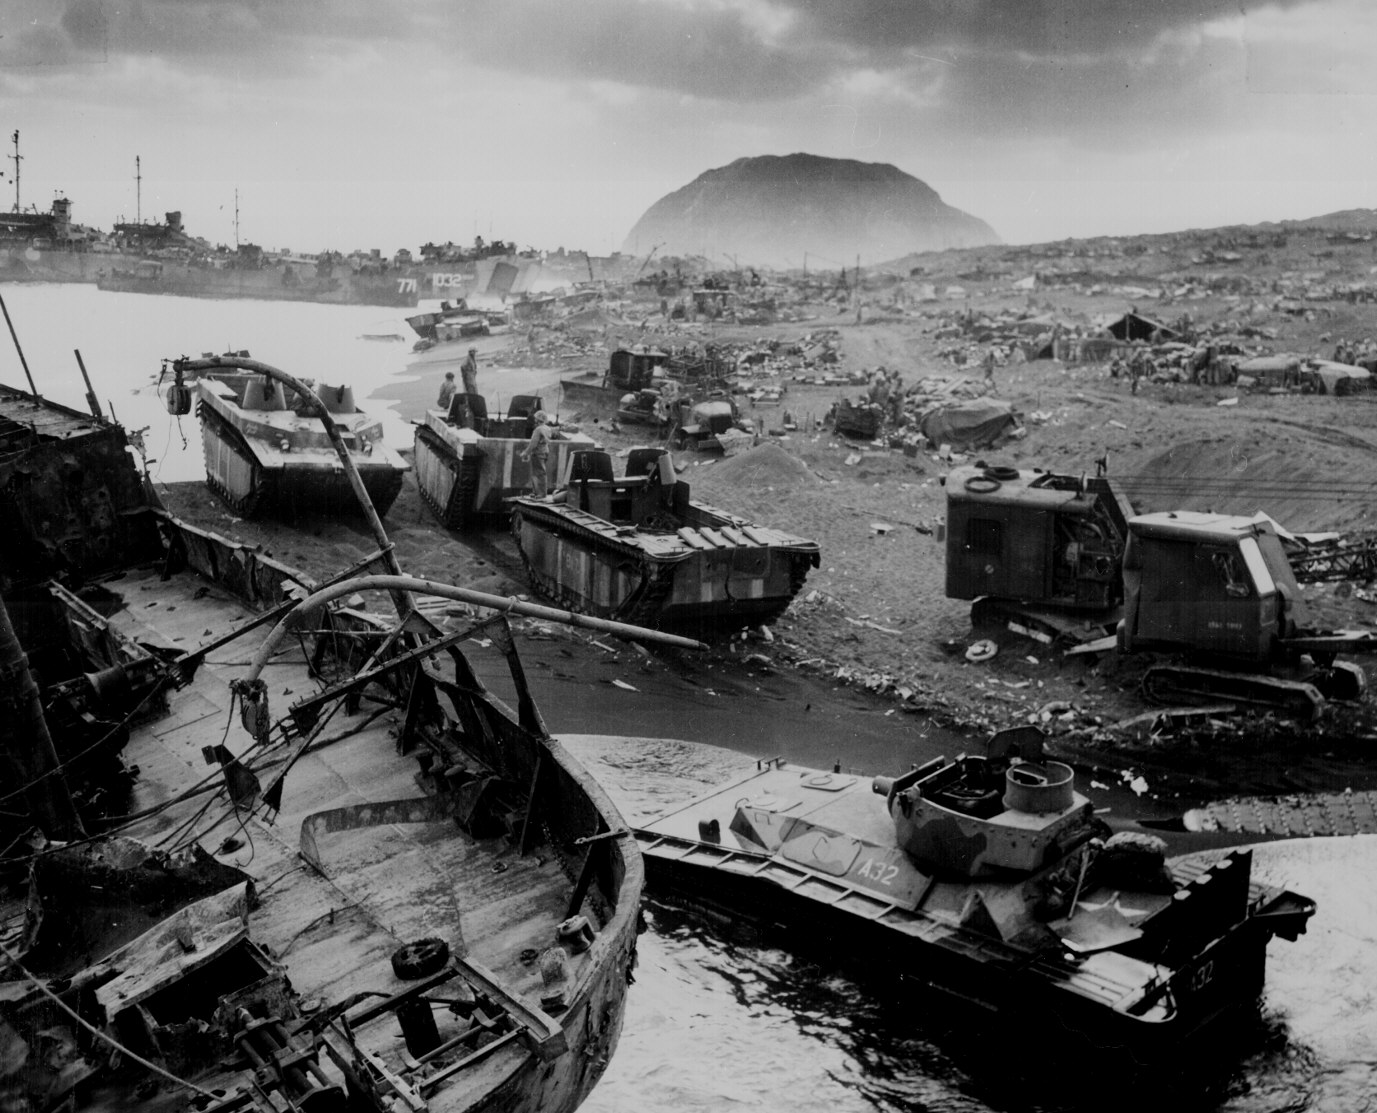 Wreckage and war material lost on the landing beaches of Iwo Jima. (National Archives)